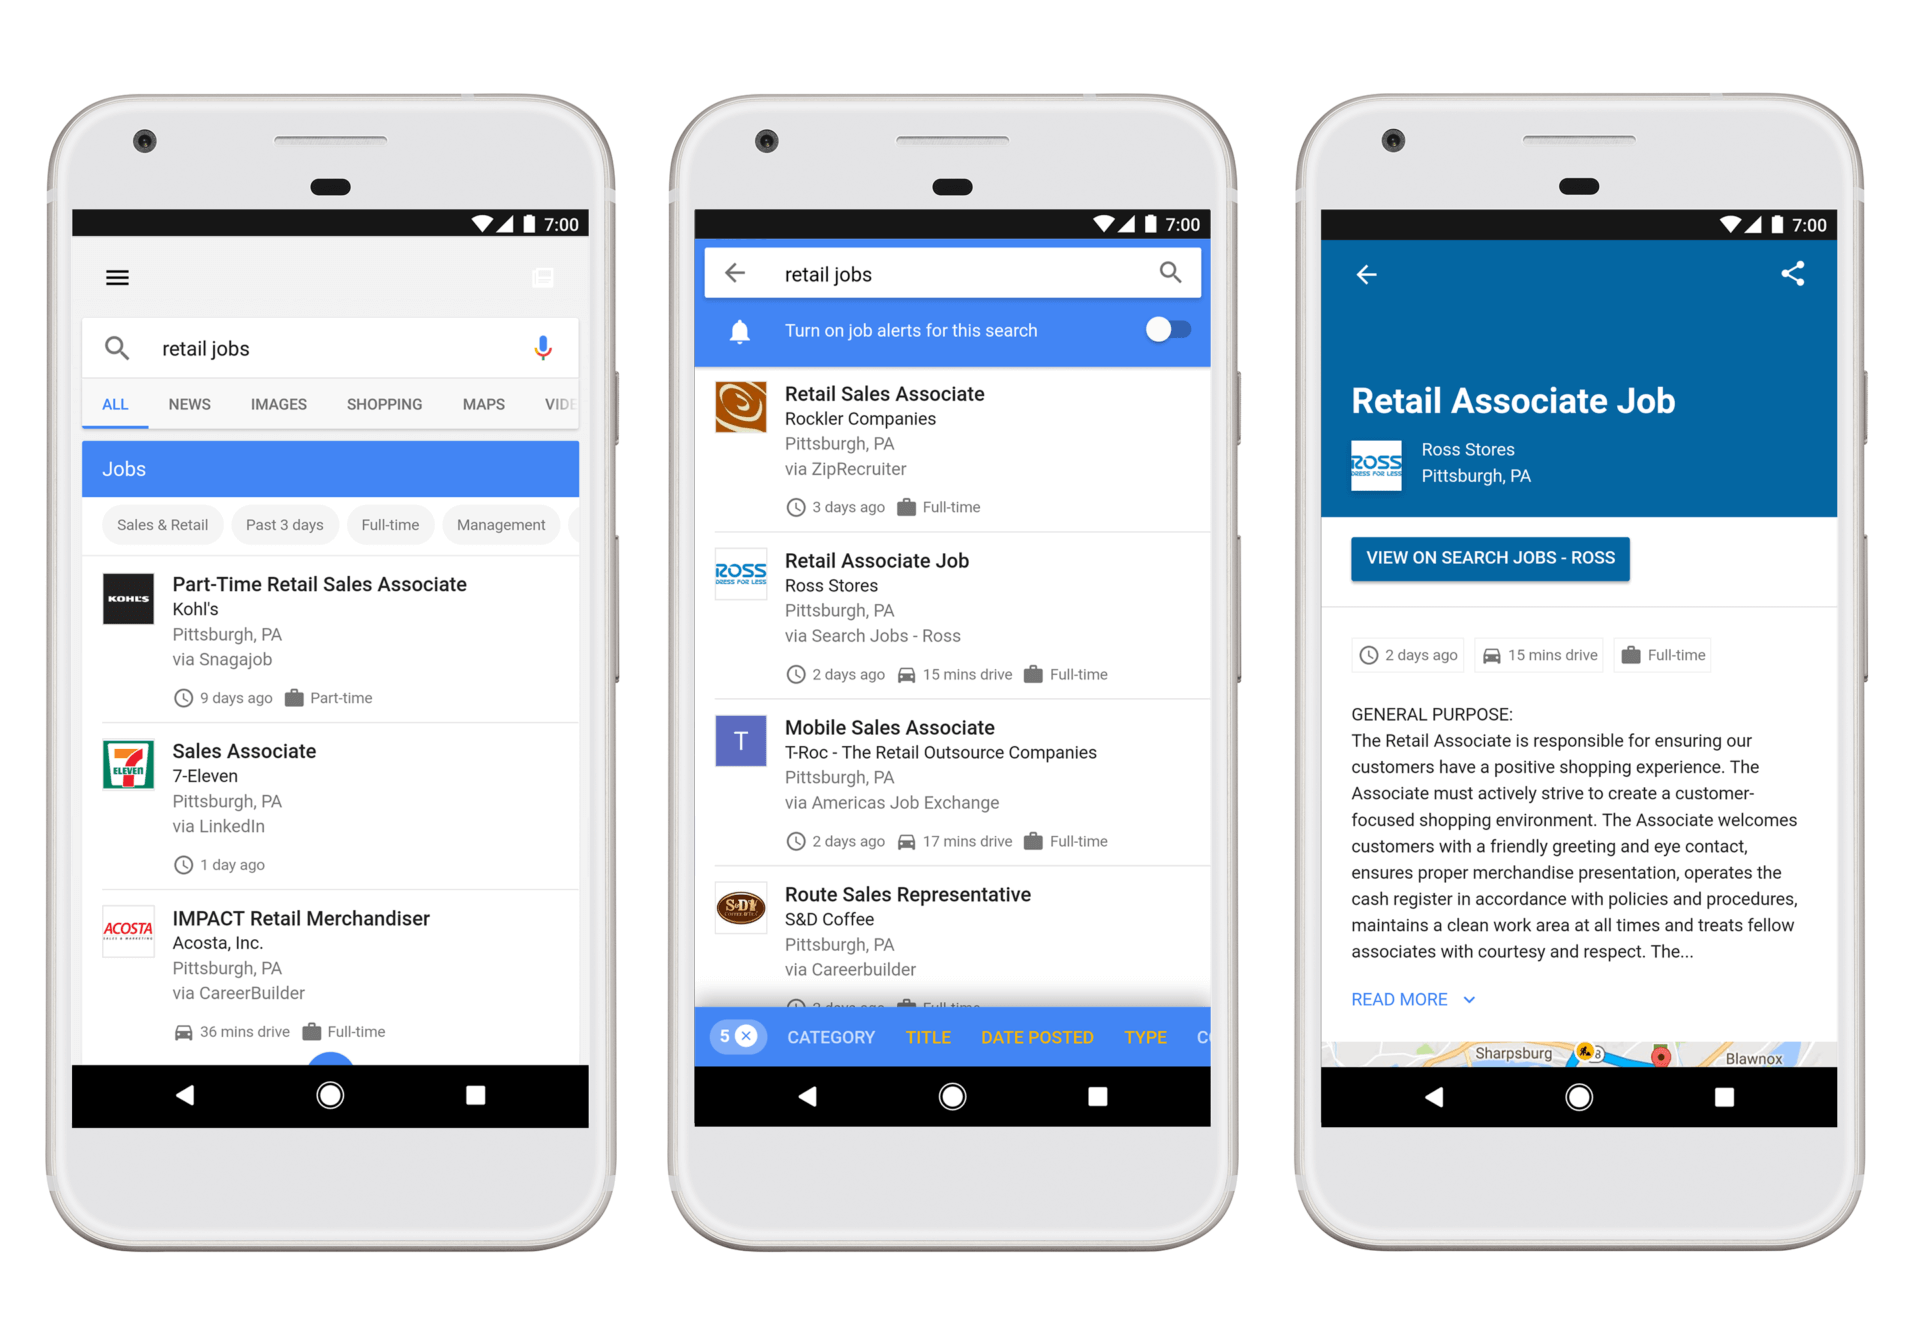 Google's job listings search is now open to all job search sites